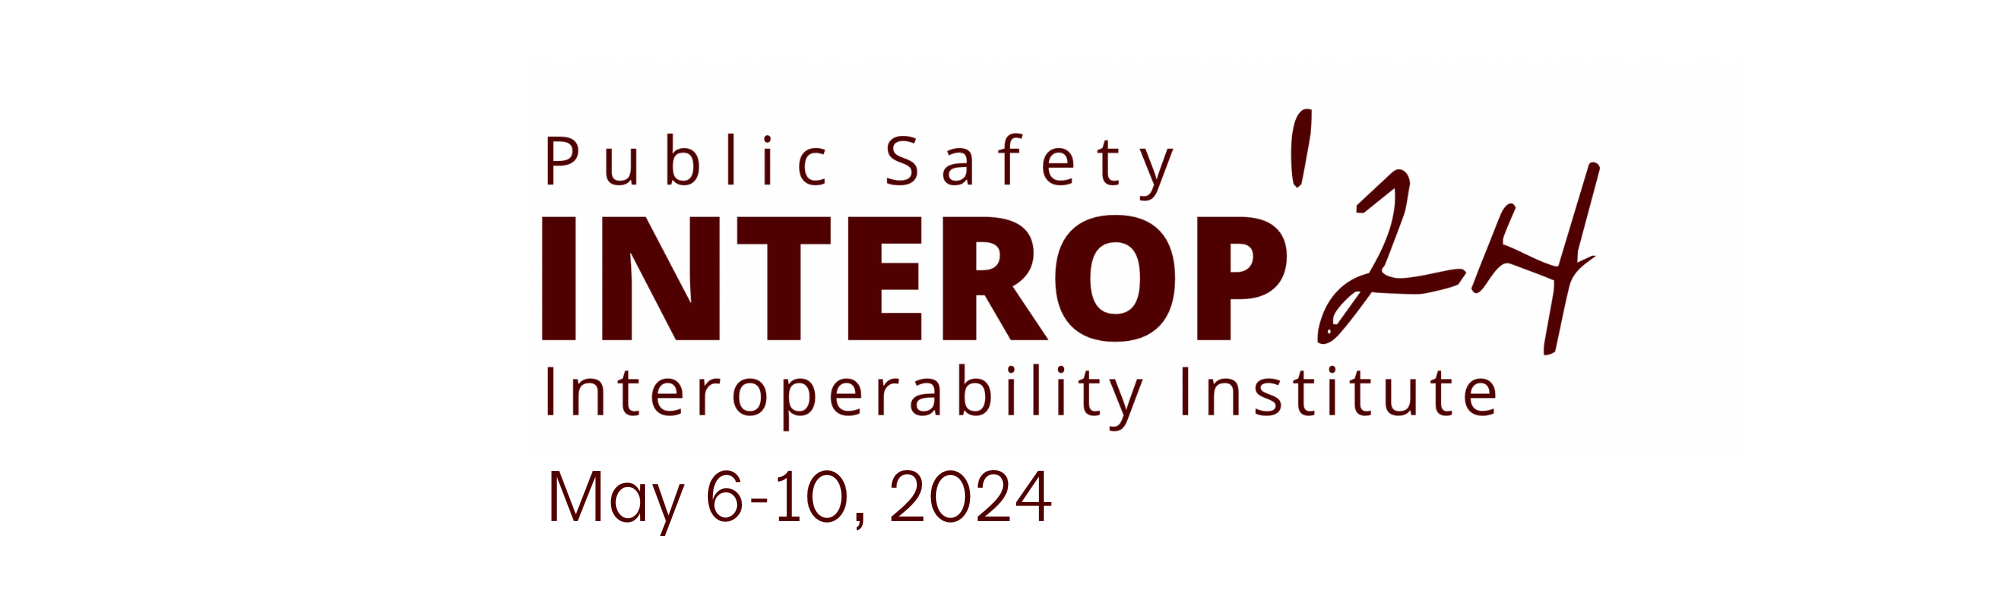 InterOp'24 Workshop and Exercise Registration (Non-First Resonder)